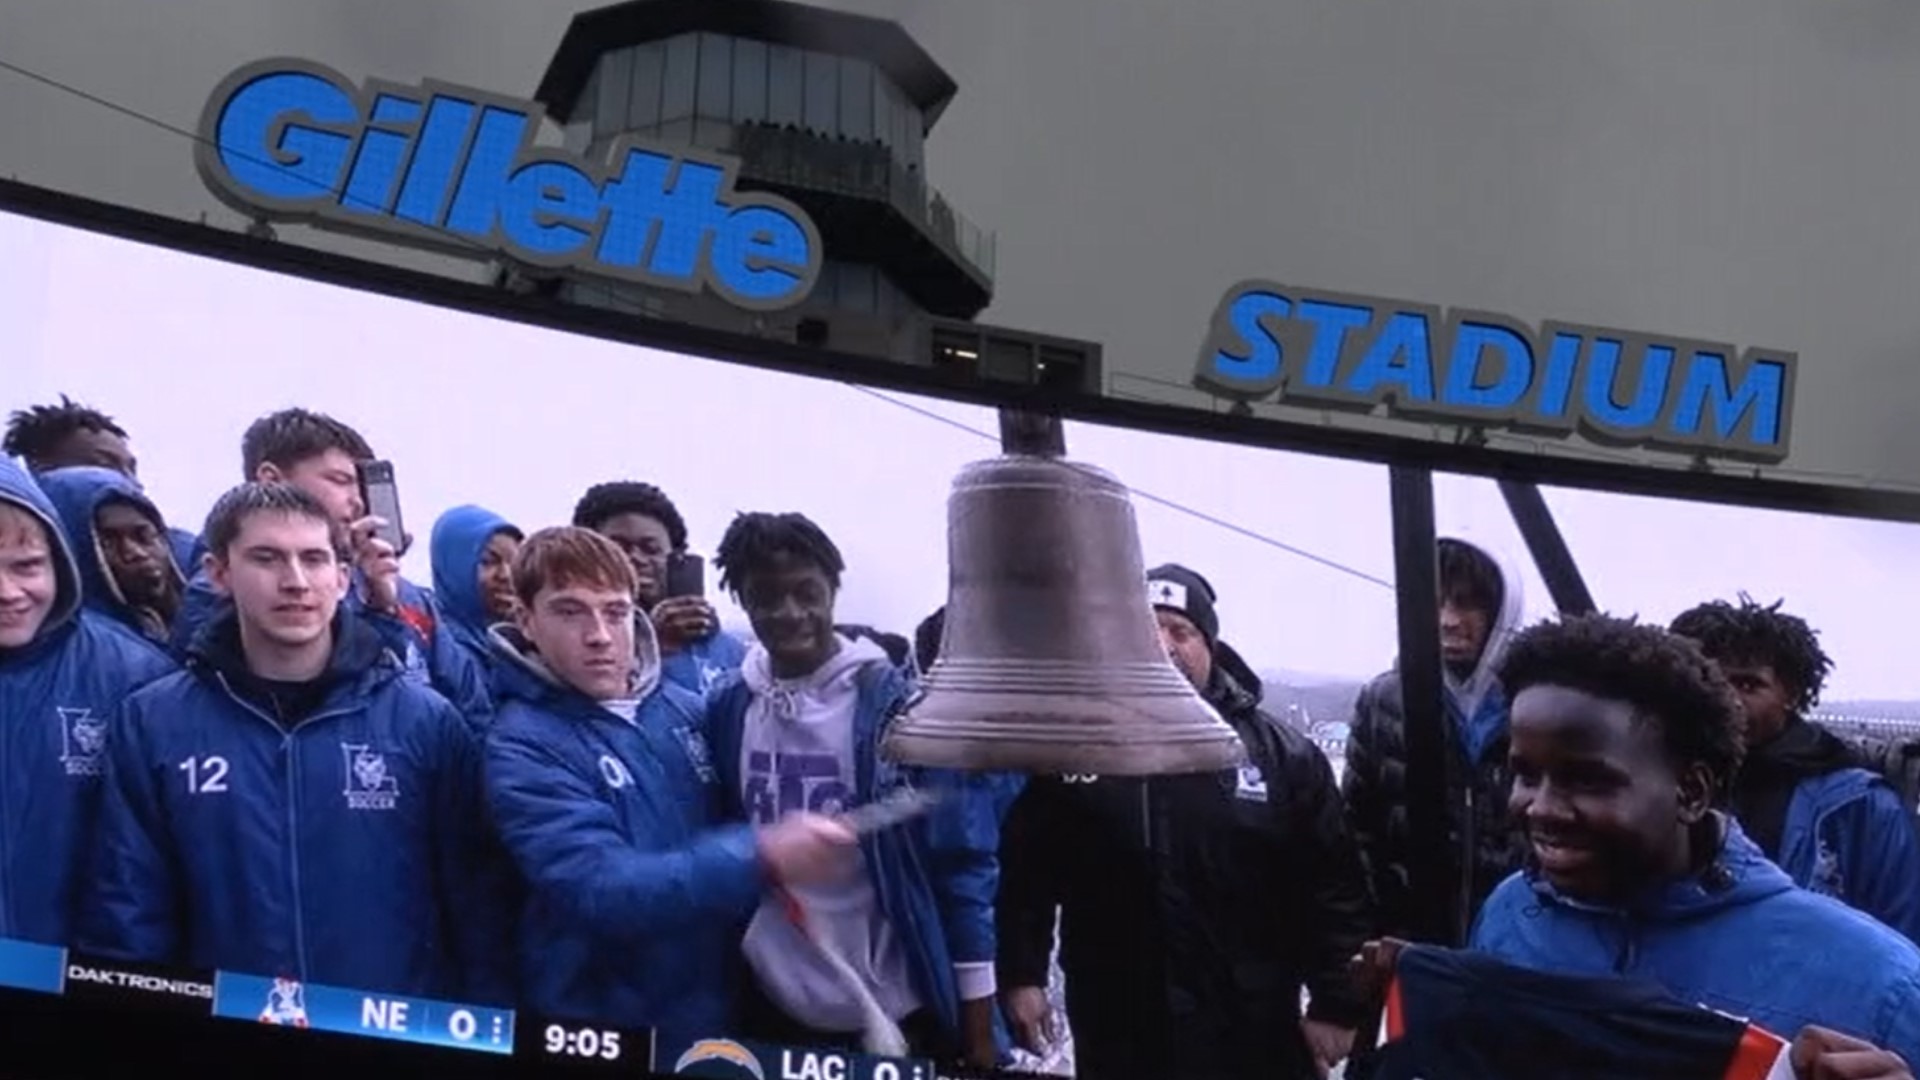 The Lewiston High School boys soccer team served as the honorary "Keepers of the Light" at Gillette Stadium — a new, pregame tradition that started this season.